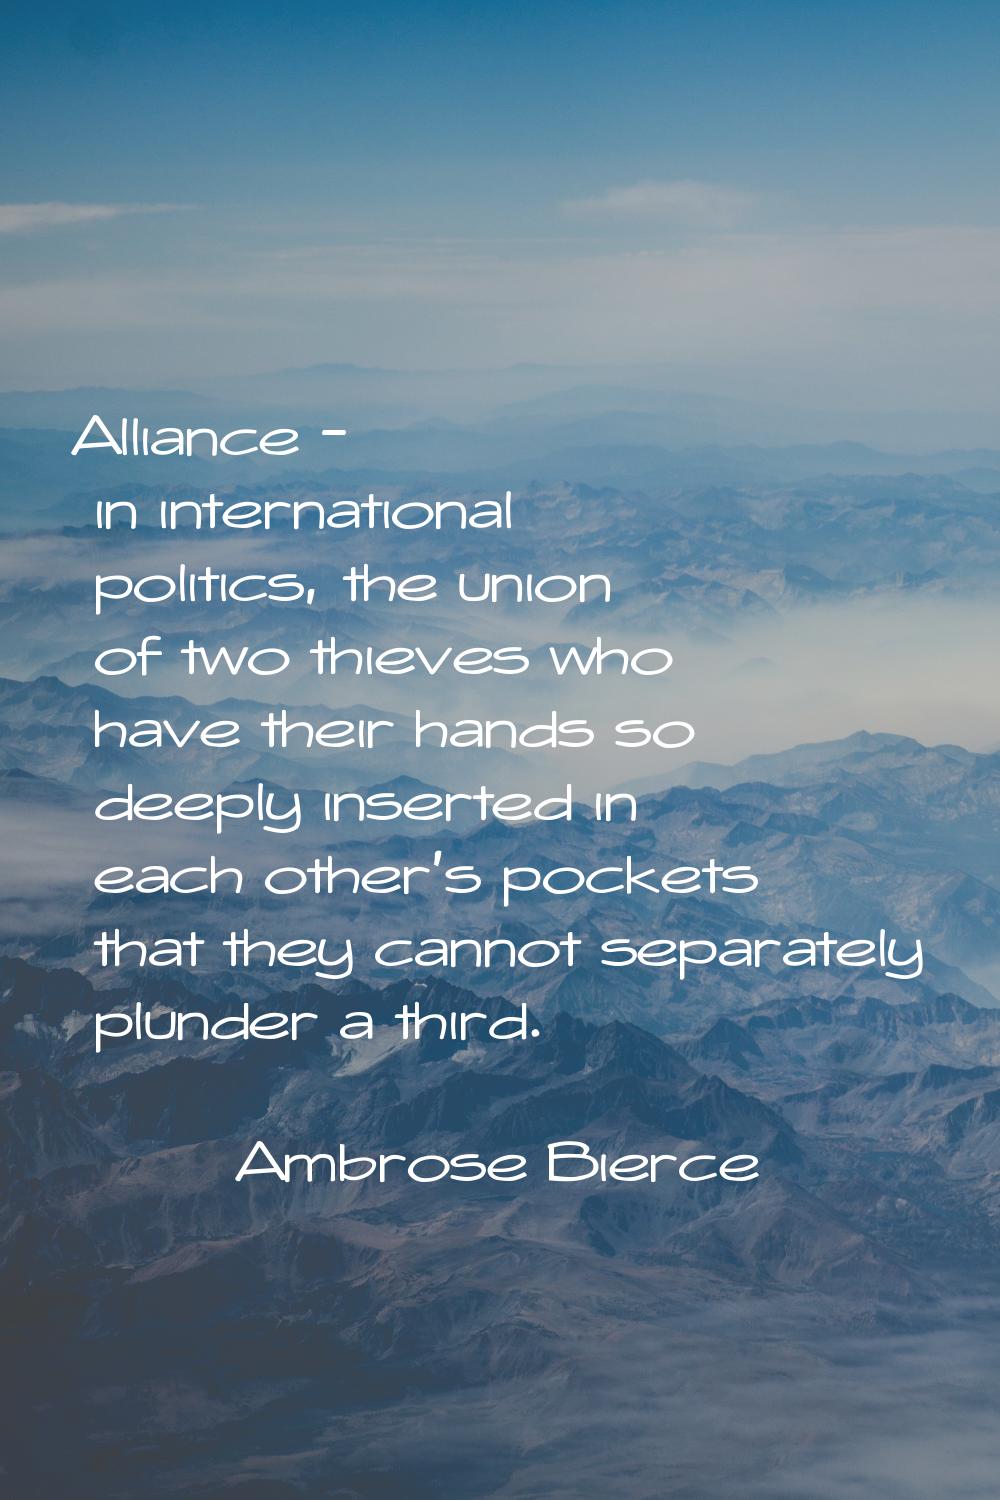 Alliance - in international politics, the union of two thieves who have their hands so deeply inser